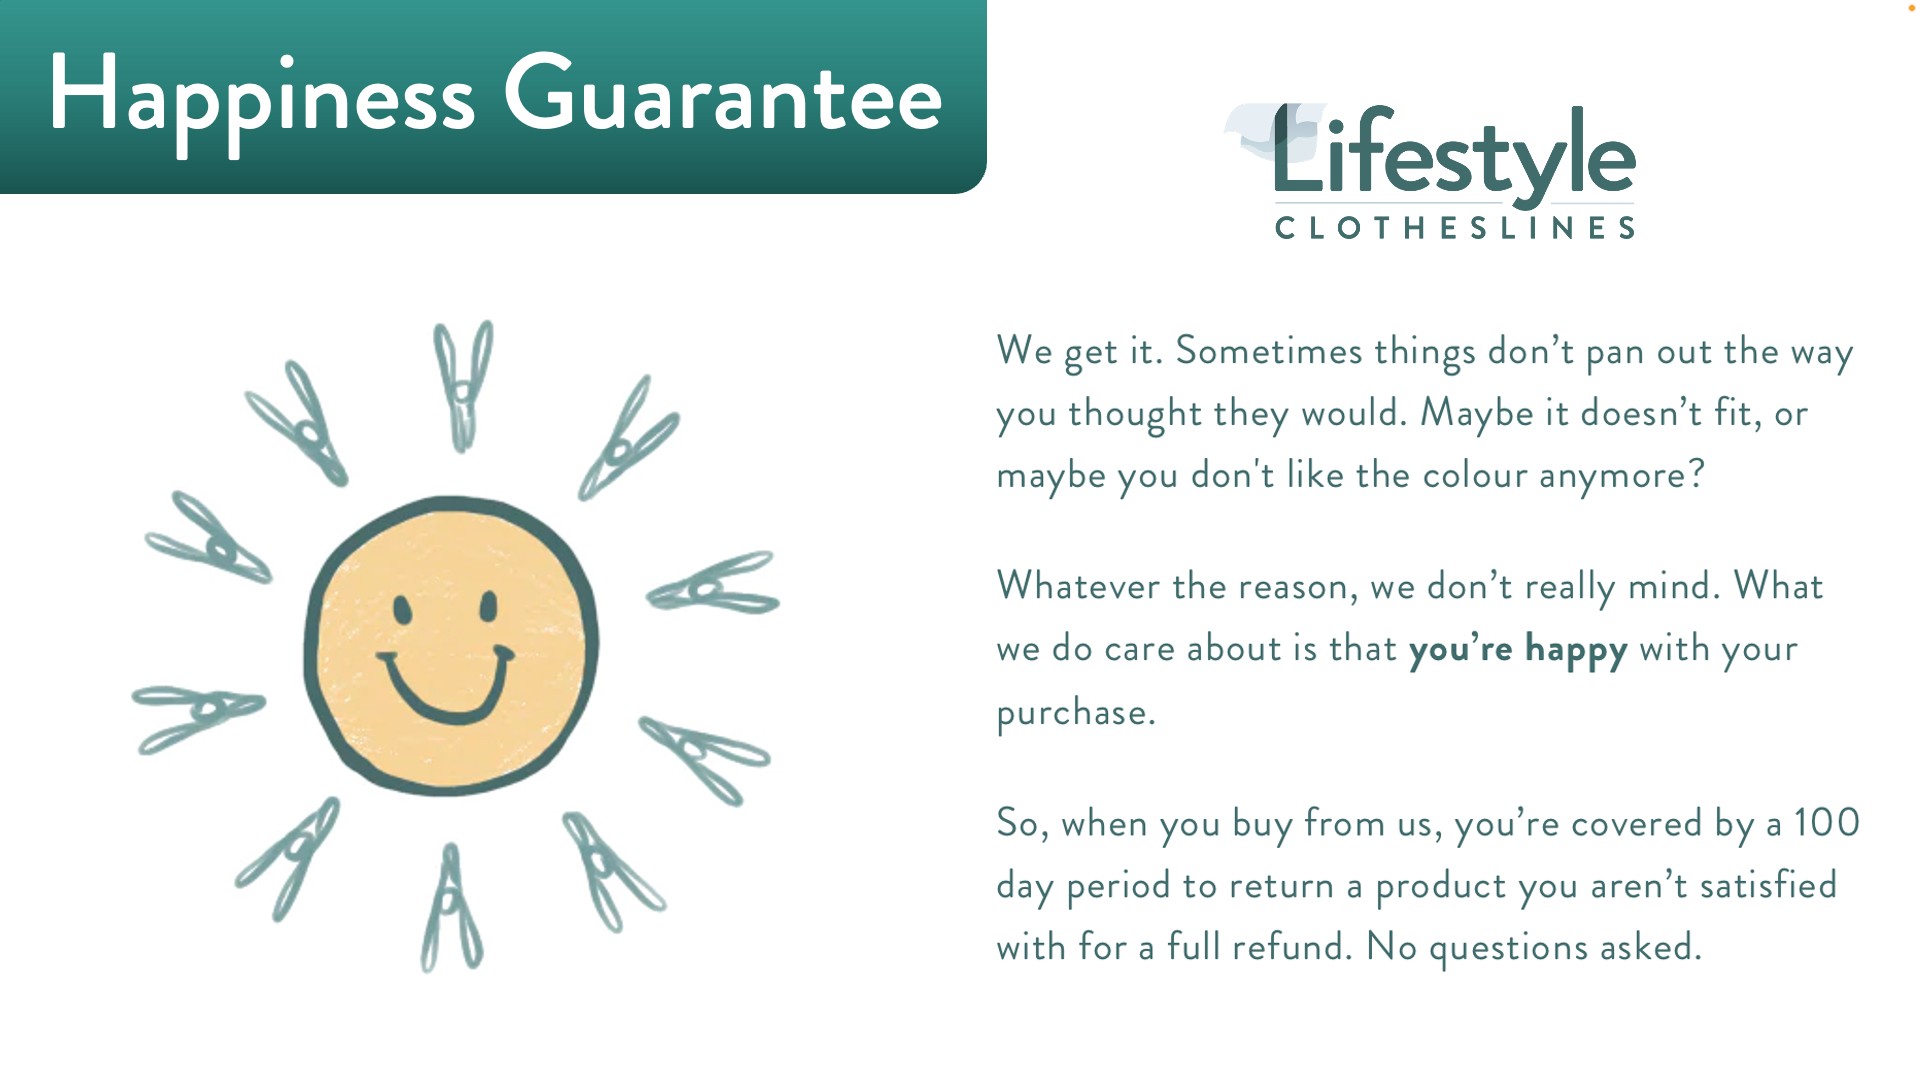 1.2m clothesline purchase 100 day happiness guarantee